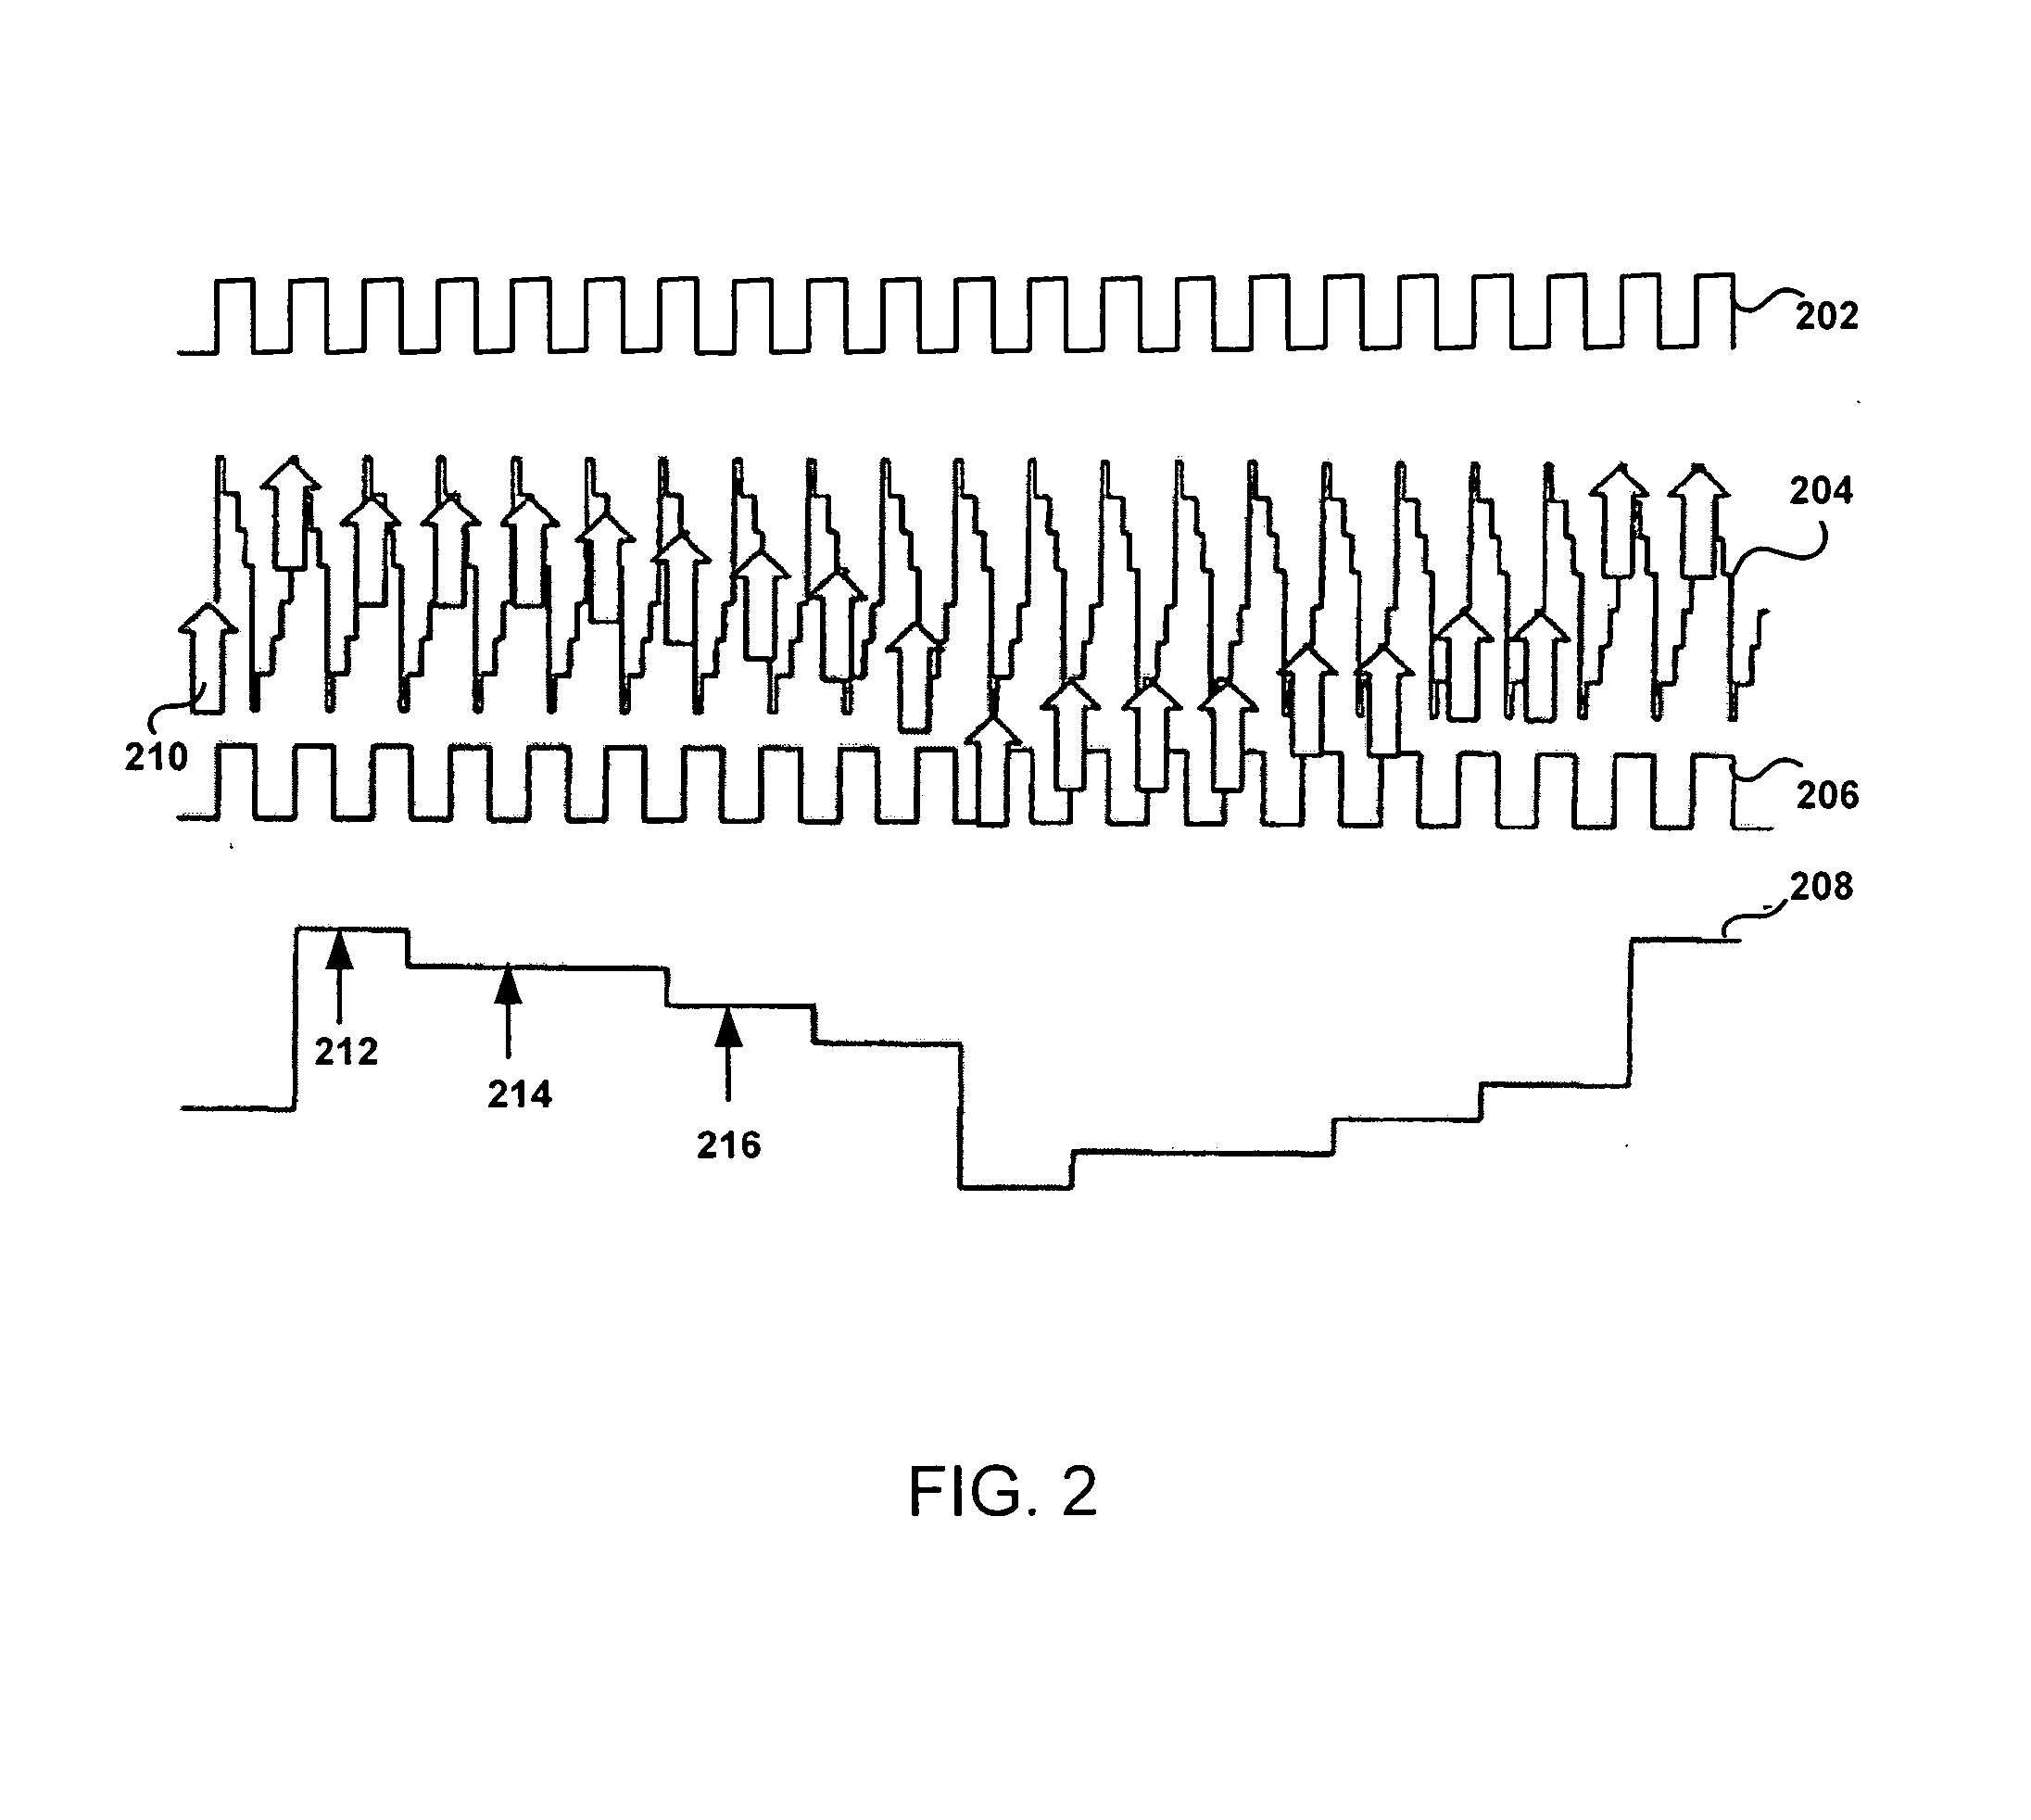 Fluid level detection device and methods